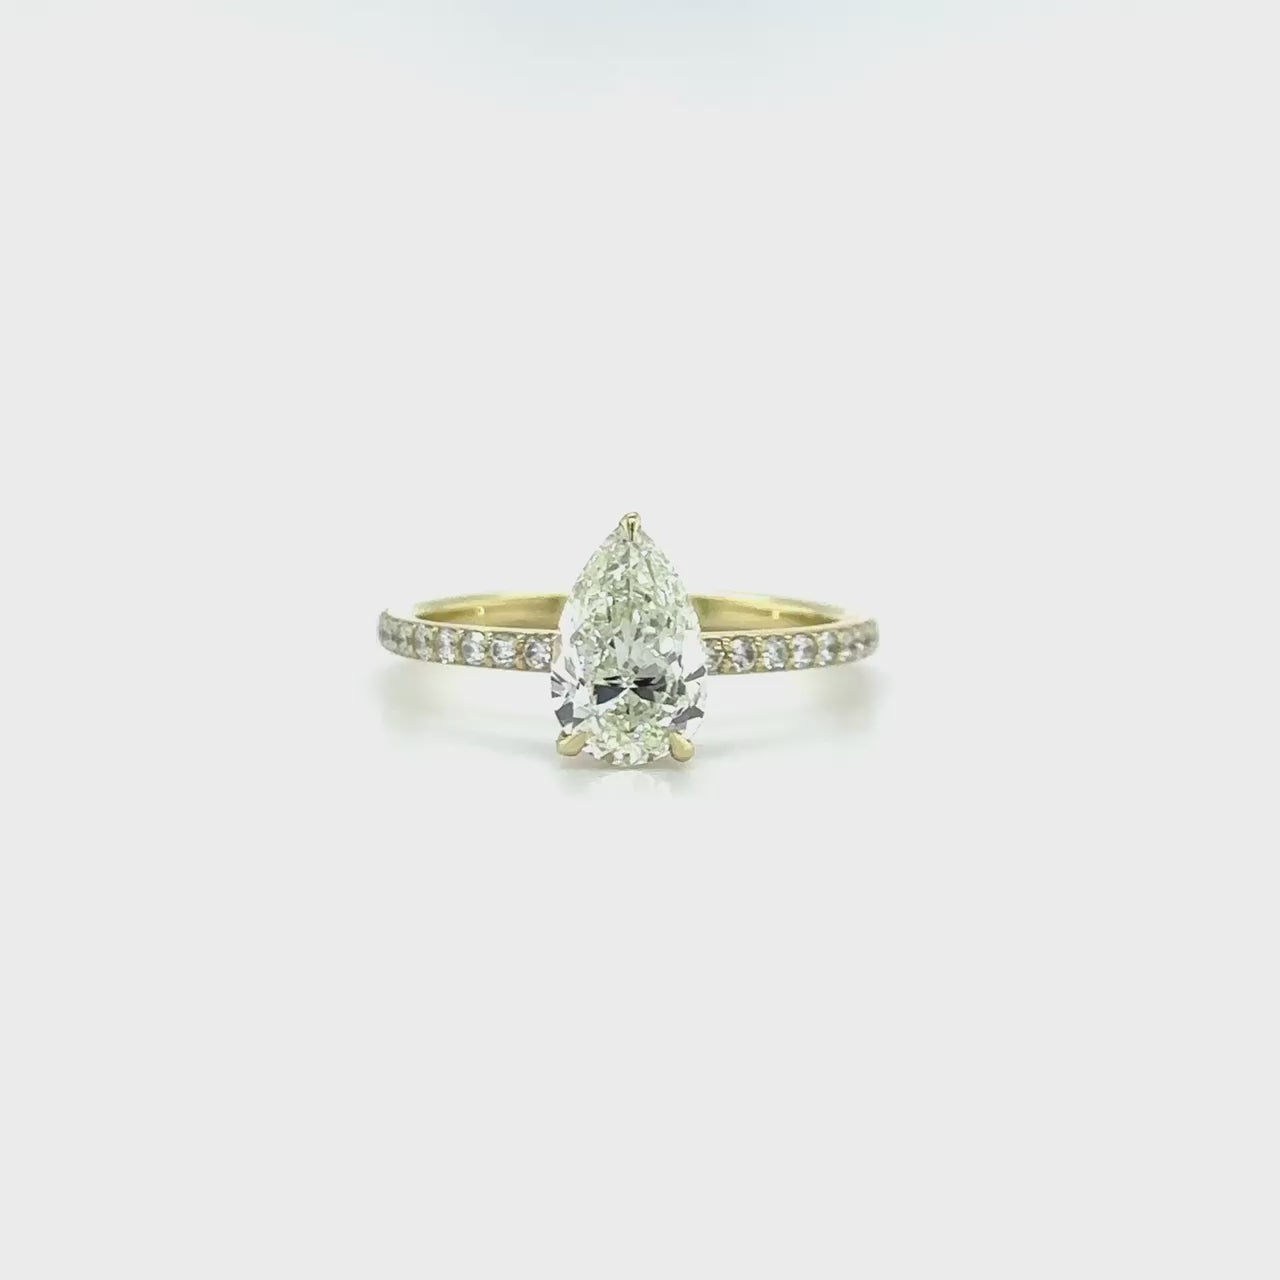 Pear Shape Solitaire Diamond Ring: Elegant Engagement Jewelry, Sparkling Pear Cut Diamond Ring, Timeless Solitaire Design, 14K White Gold Ring, Symbol of Love and Commitment, Perfect Engagement or Anniversary Gift, Dazzling Pear Shaped Diamond, Classic and Sophisticated Ring, Graceful and Unique Diamond Jewelry, Handcrafted Beauty for Special Moments